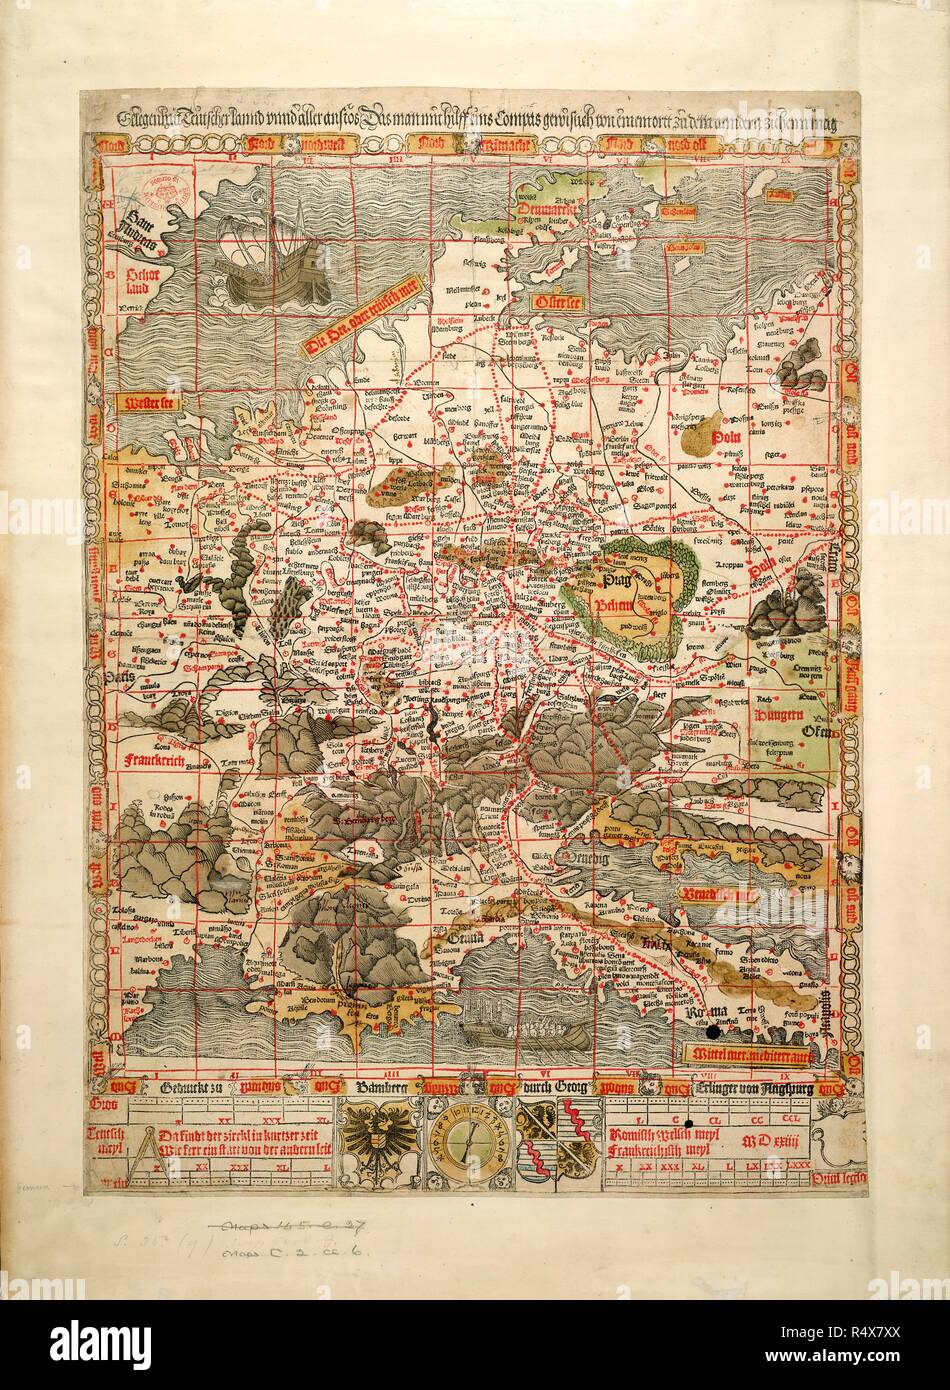 The Holy Roman Empire. Gelegenheit Teutscher Lannd unnd aller anstÃ¶s Das. Bamberg : Georg Erlinger, 1524. A woodcut map, showing the Holy Roman Empire and parts of the adjacent countries.  Image taken from Gelegenheit Teutscher Lannd unnd aller anstÃ¶s Das man mit hilff eins Compas gewislich von einem ortt zu dem andern ziehen mag. [A woodcut map, showing the Holy Roman Empire and parts of the adjacent countries with the principal roads. With a marginal index, an illustration of a compass-dial and scales in four of the different miles then in use in the Empire and neighbouring countries.] Teu Stock Photo